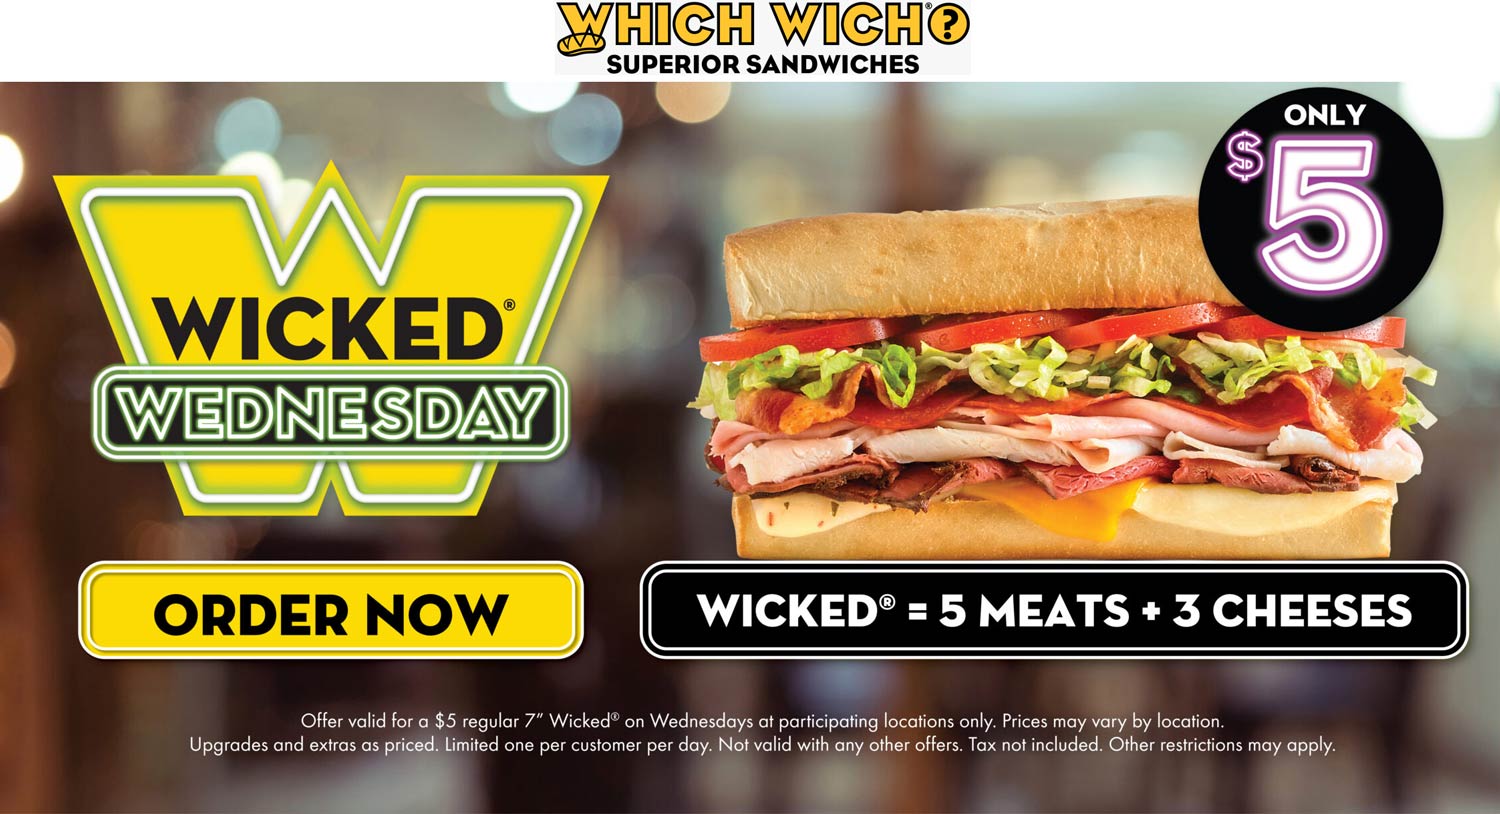 Which Wich restaurants Coupon  5 meat + 3 cheese sub sandwich for $7 today at Which Wich #whichwich 